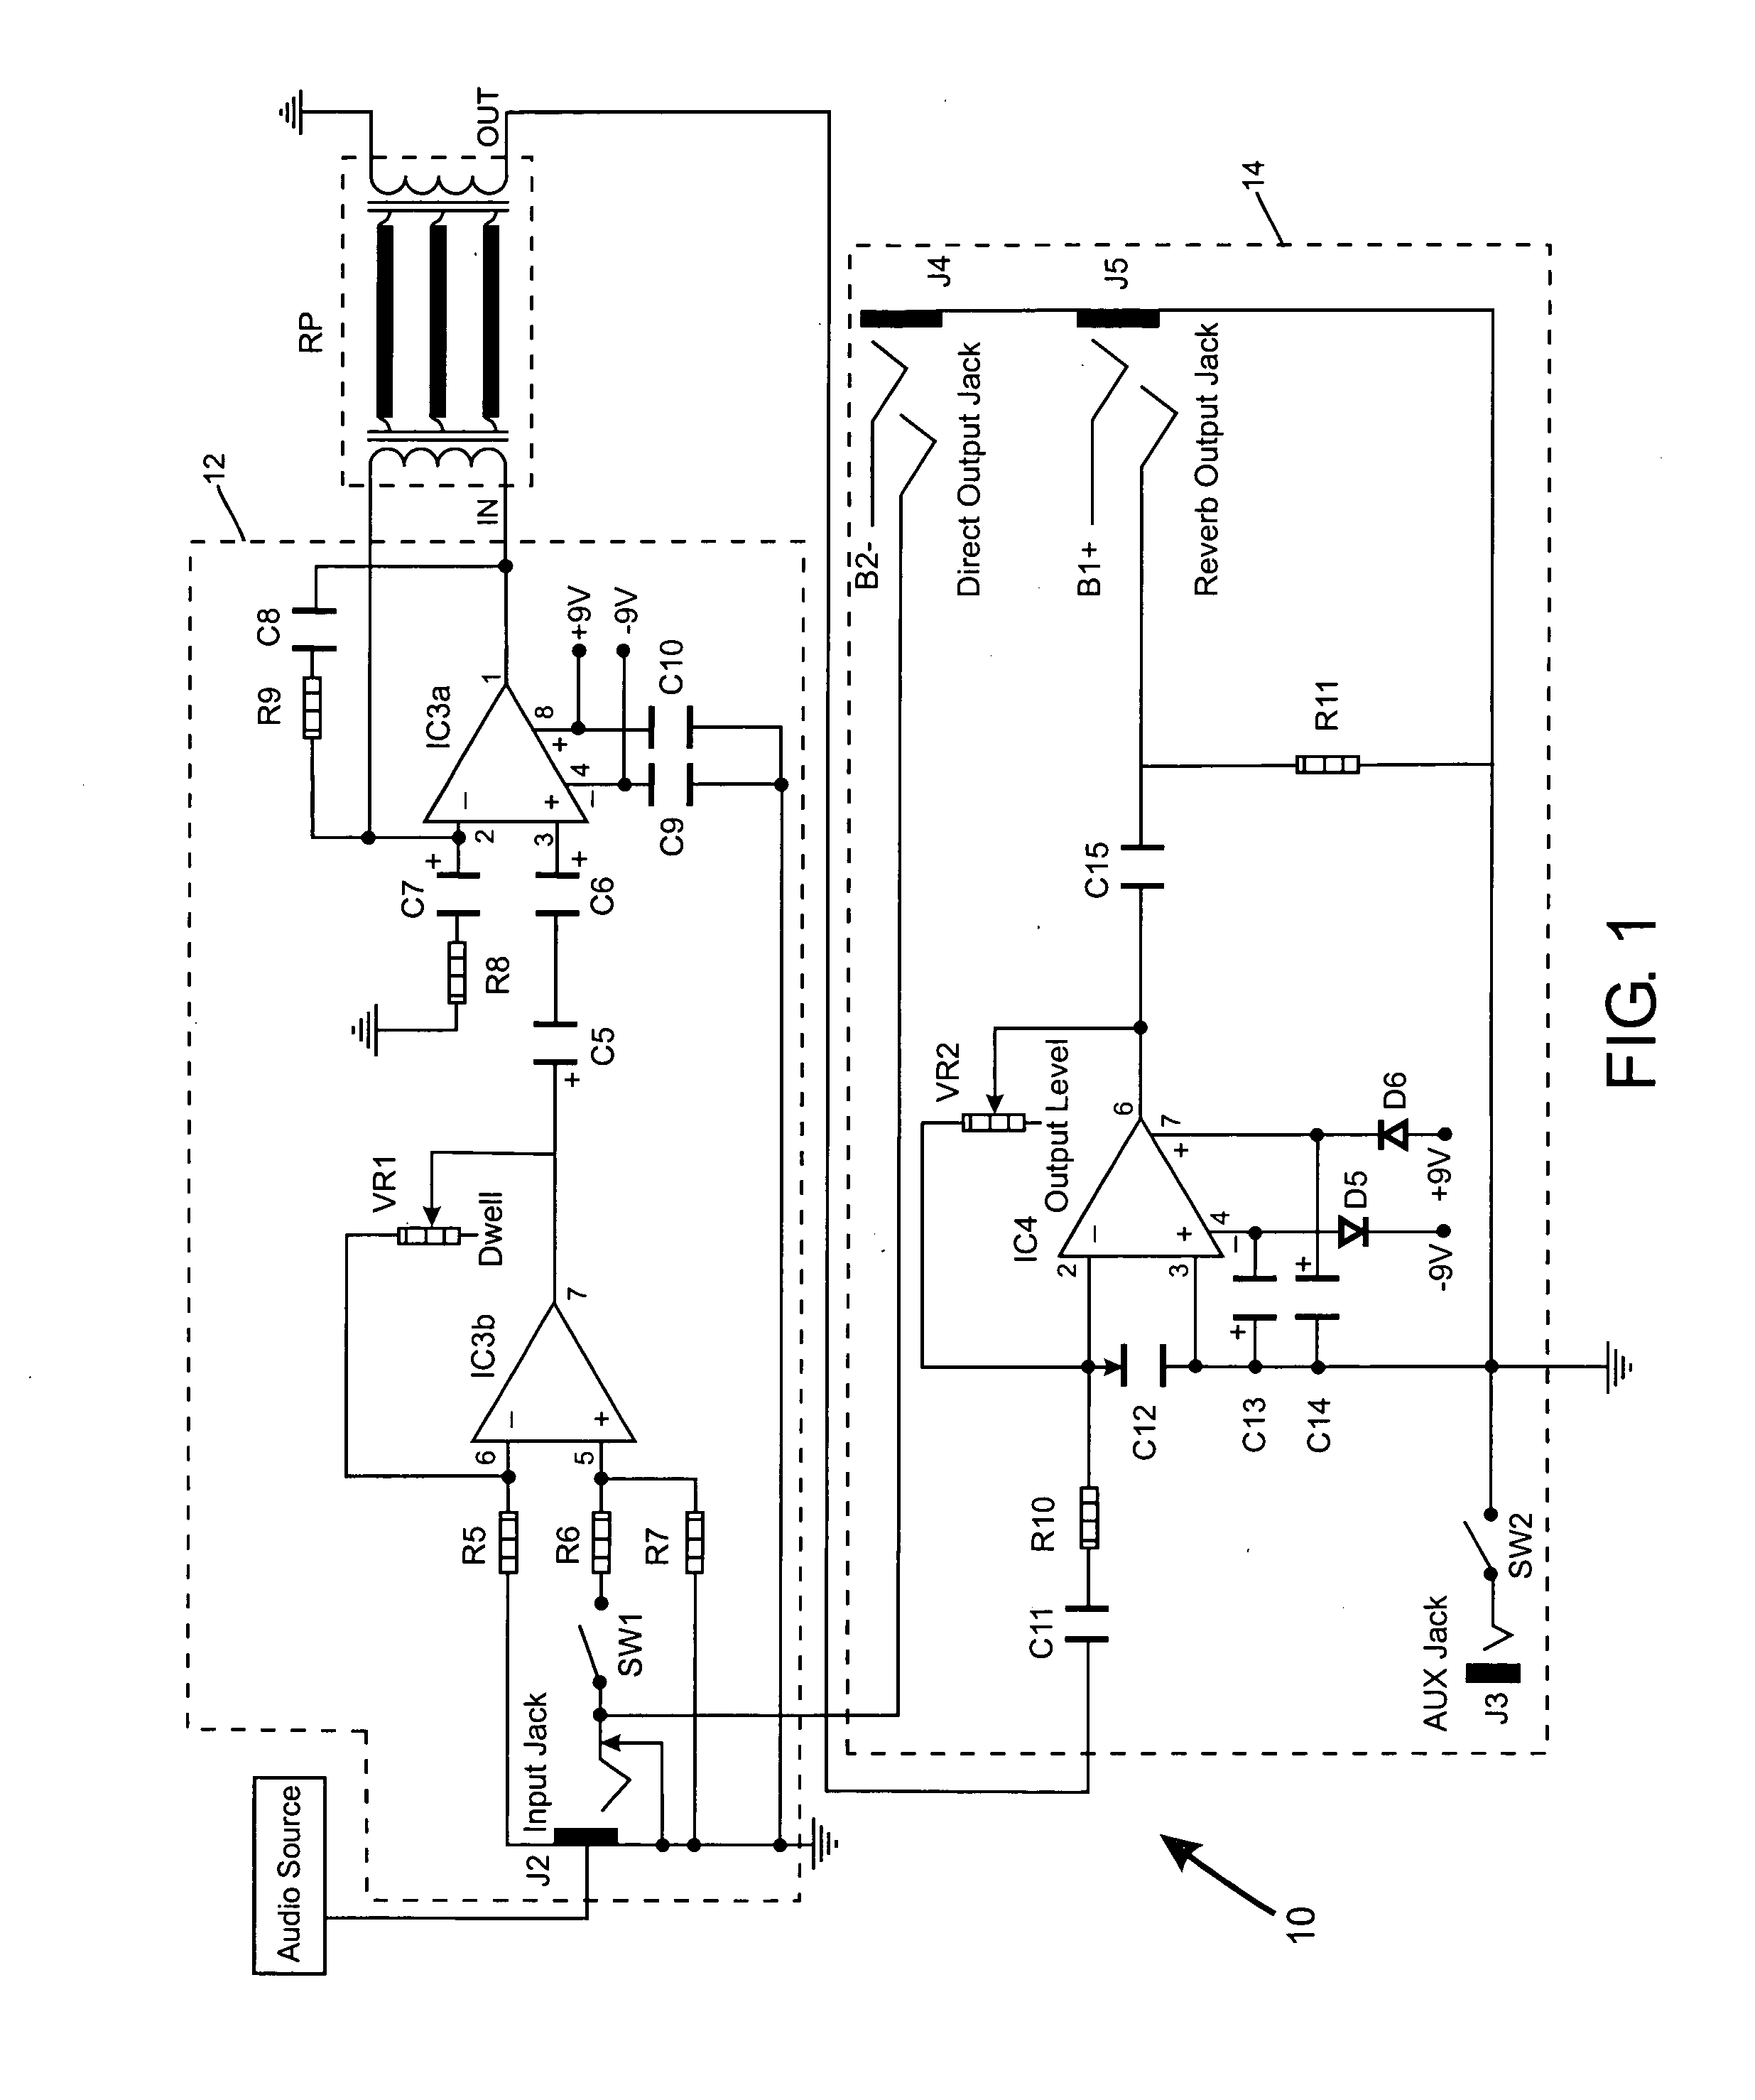 Electronic circuit with reverberation effect and improved output controllability